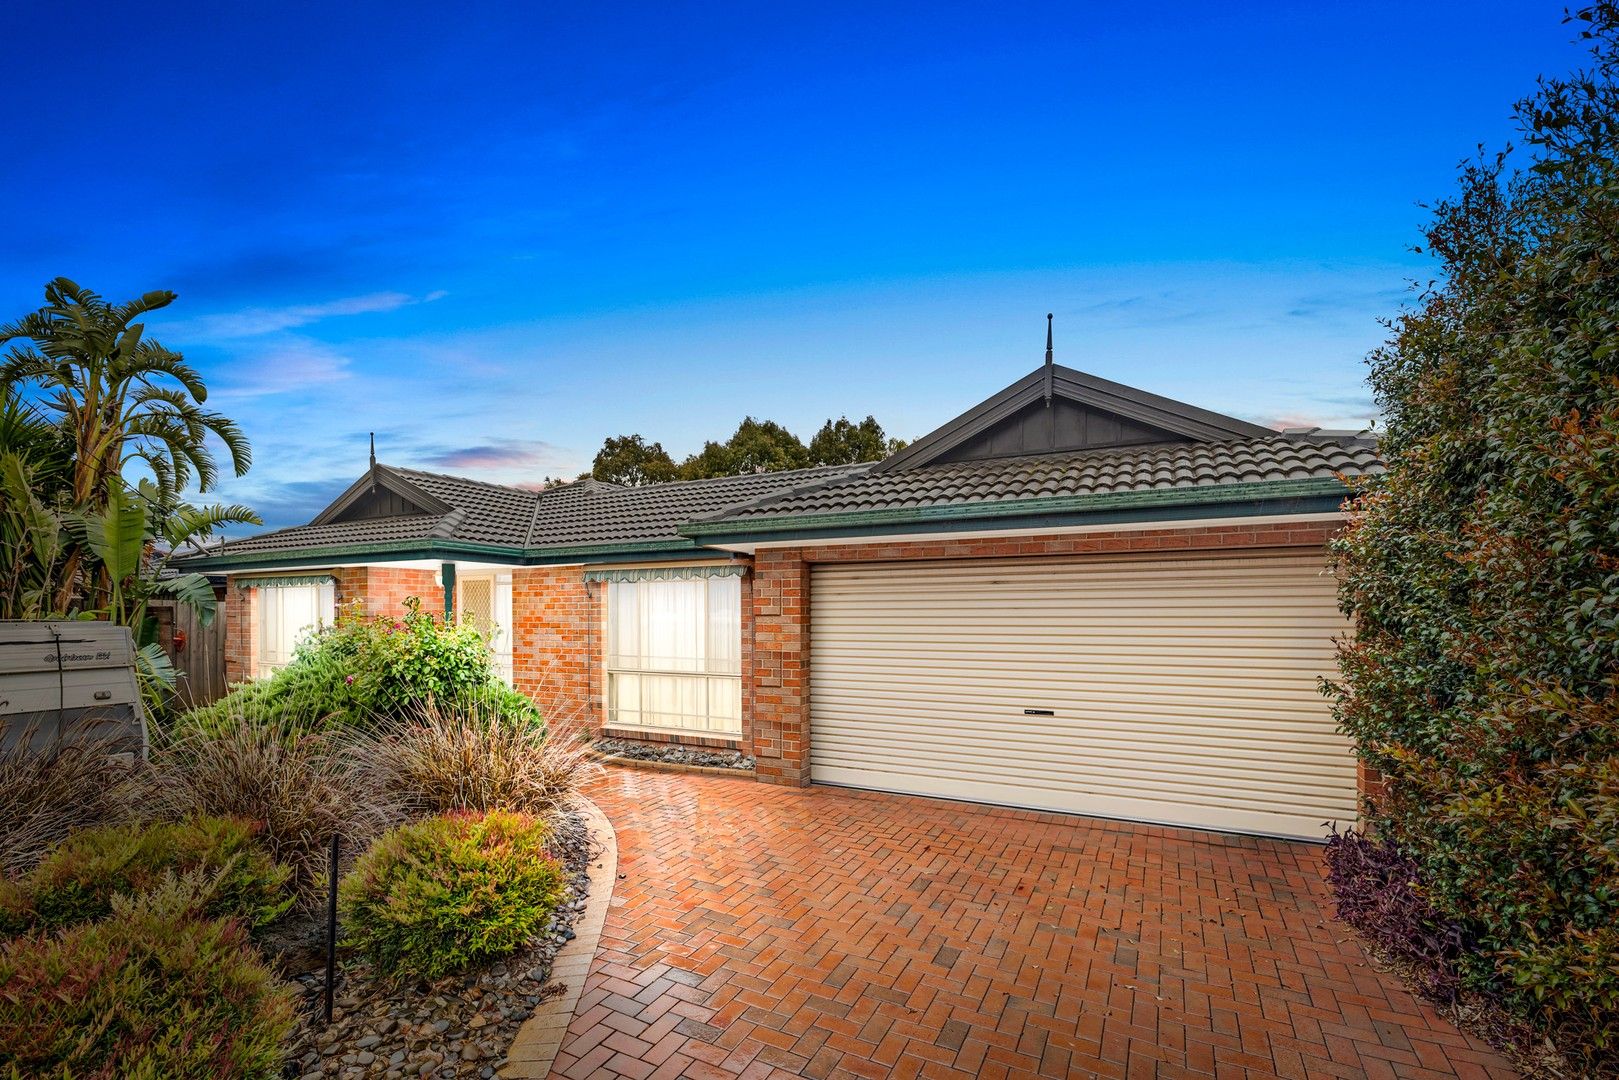 4 bedrooms House in 56 Grevillea Crescent HOPPERS CROSSING VIC, 3029